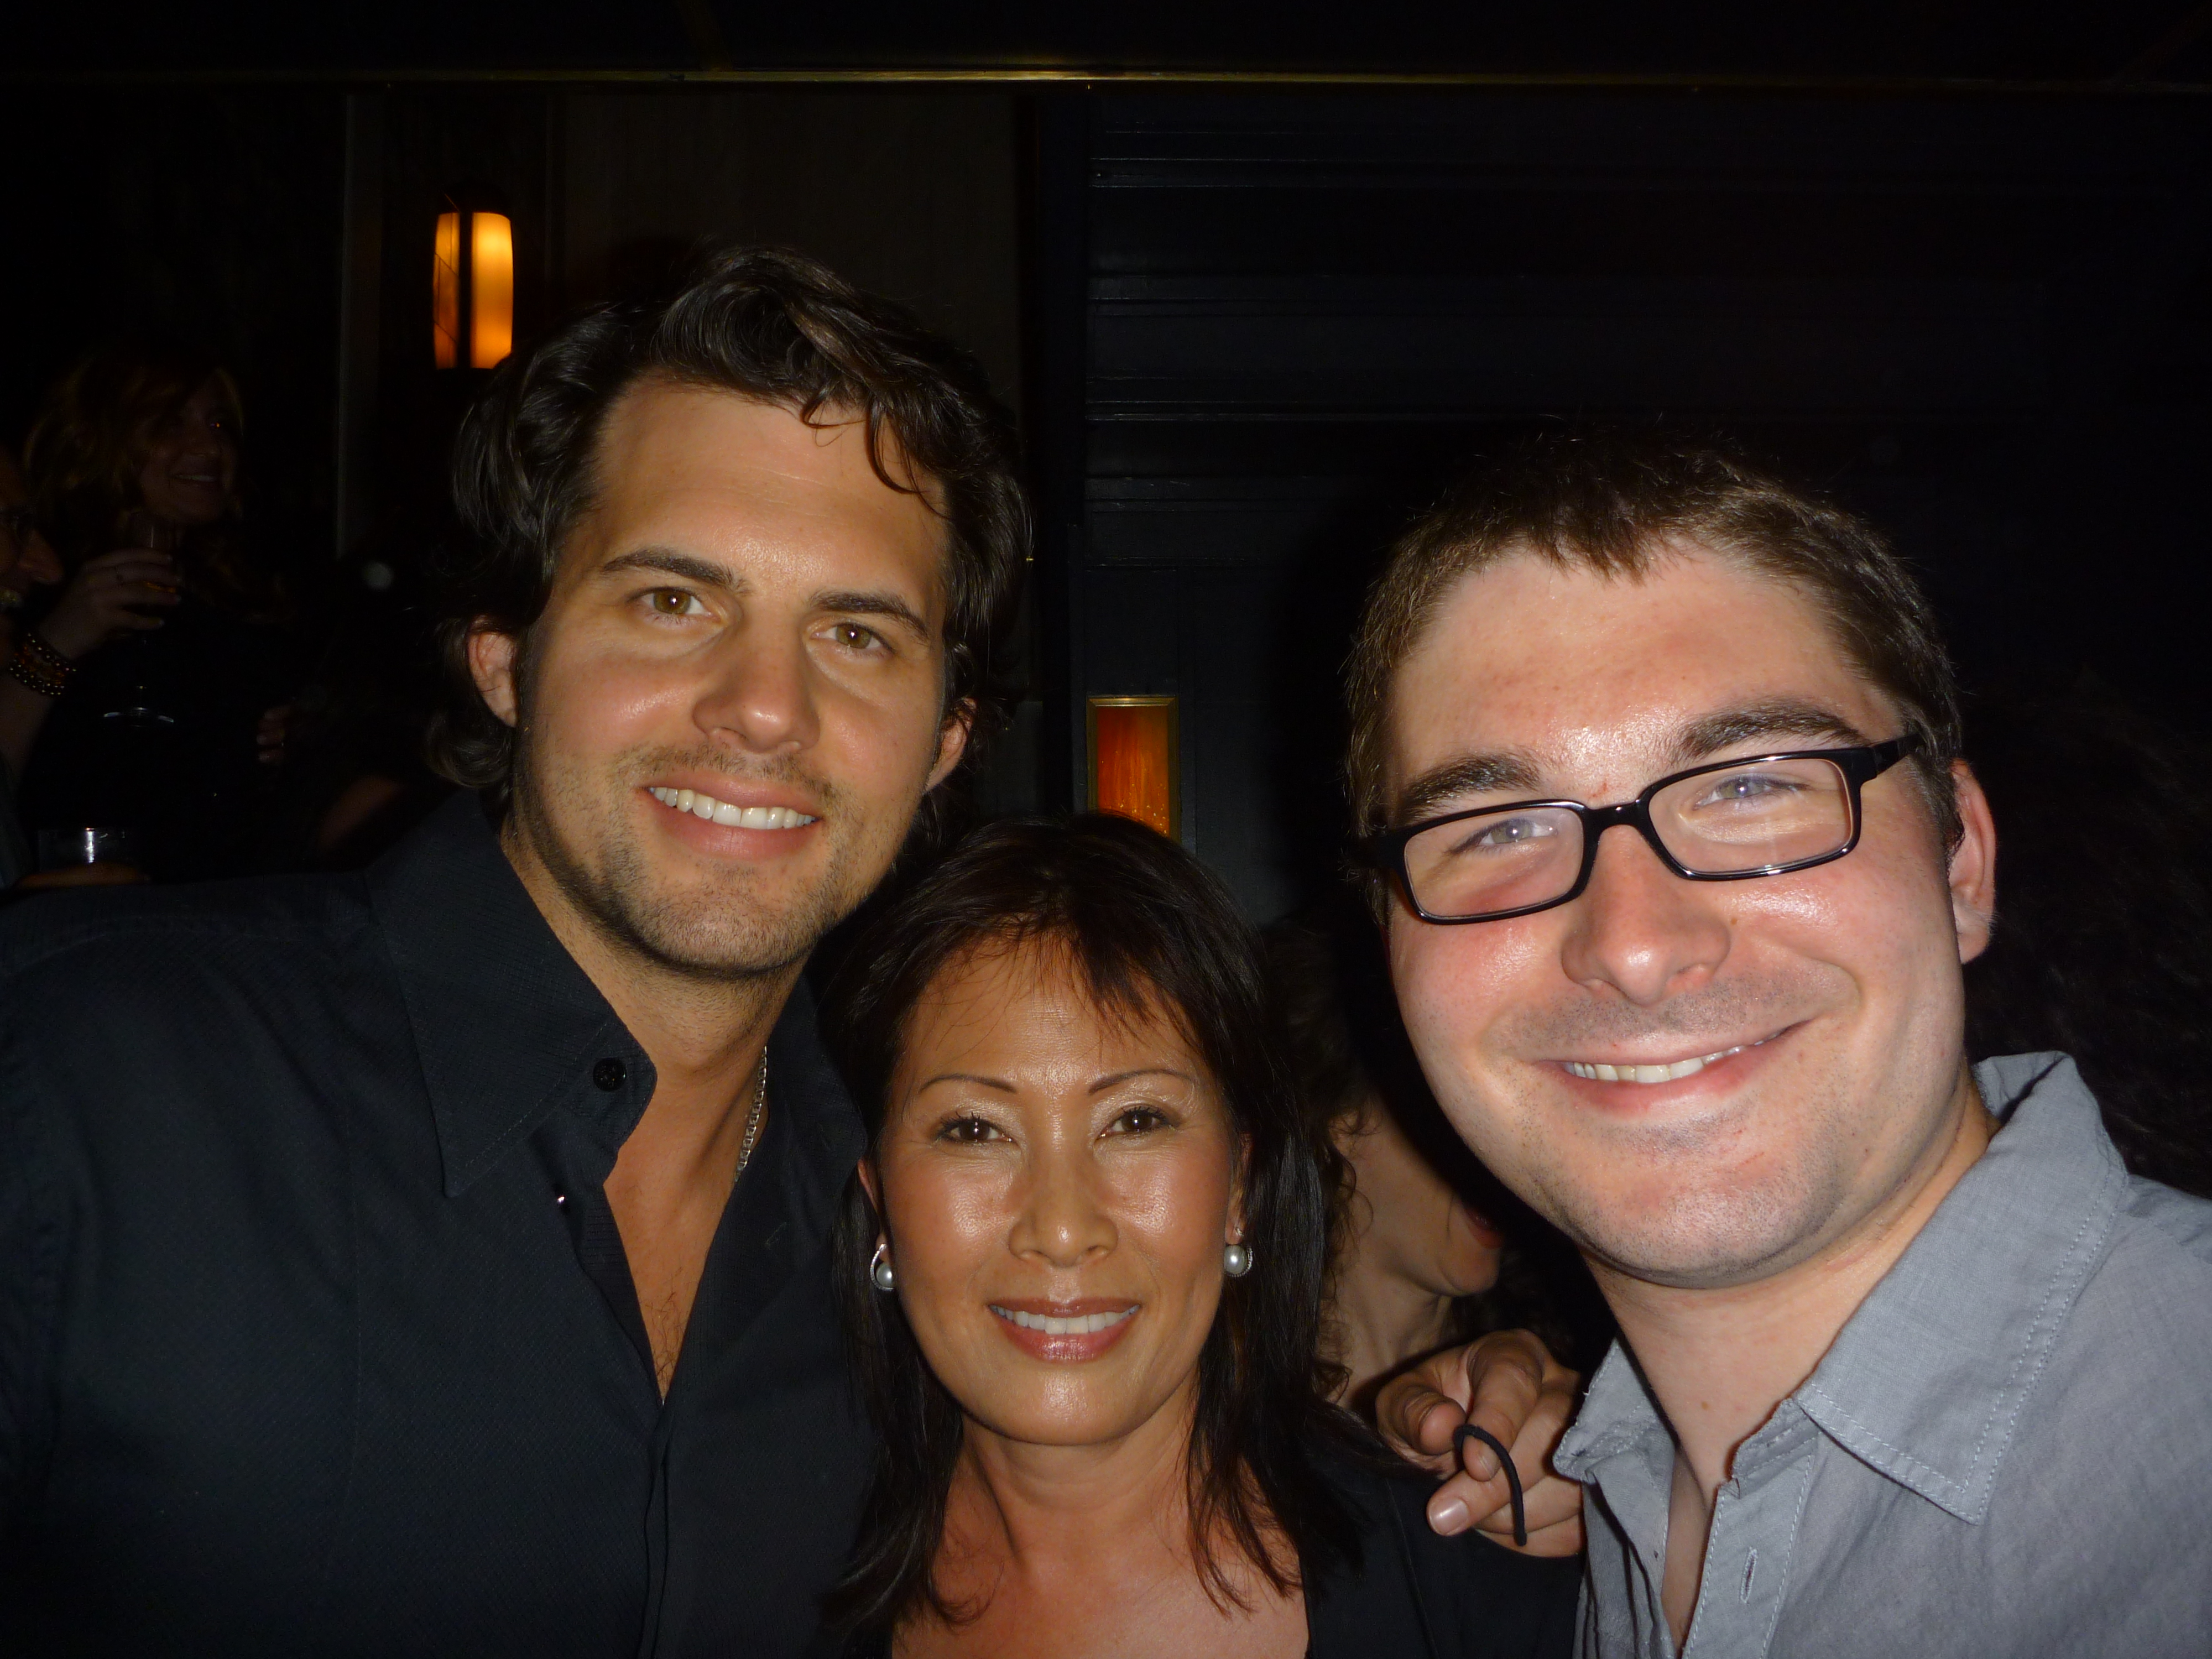 Kristoffer Polaha (Life Unexpected), Lilly Lee Maatta, and James Kicklighter at The 2010 CW Upfront Afterparty.